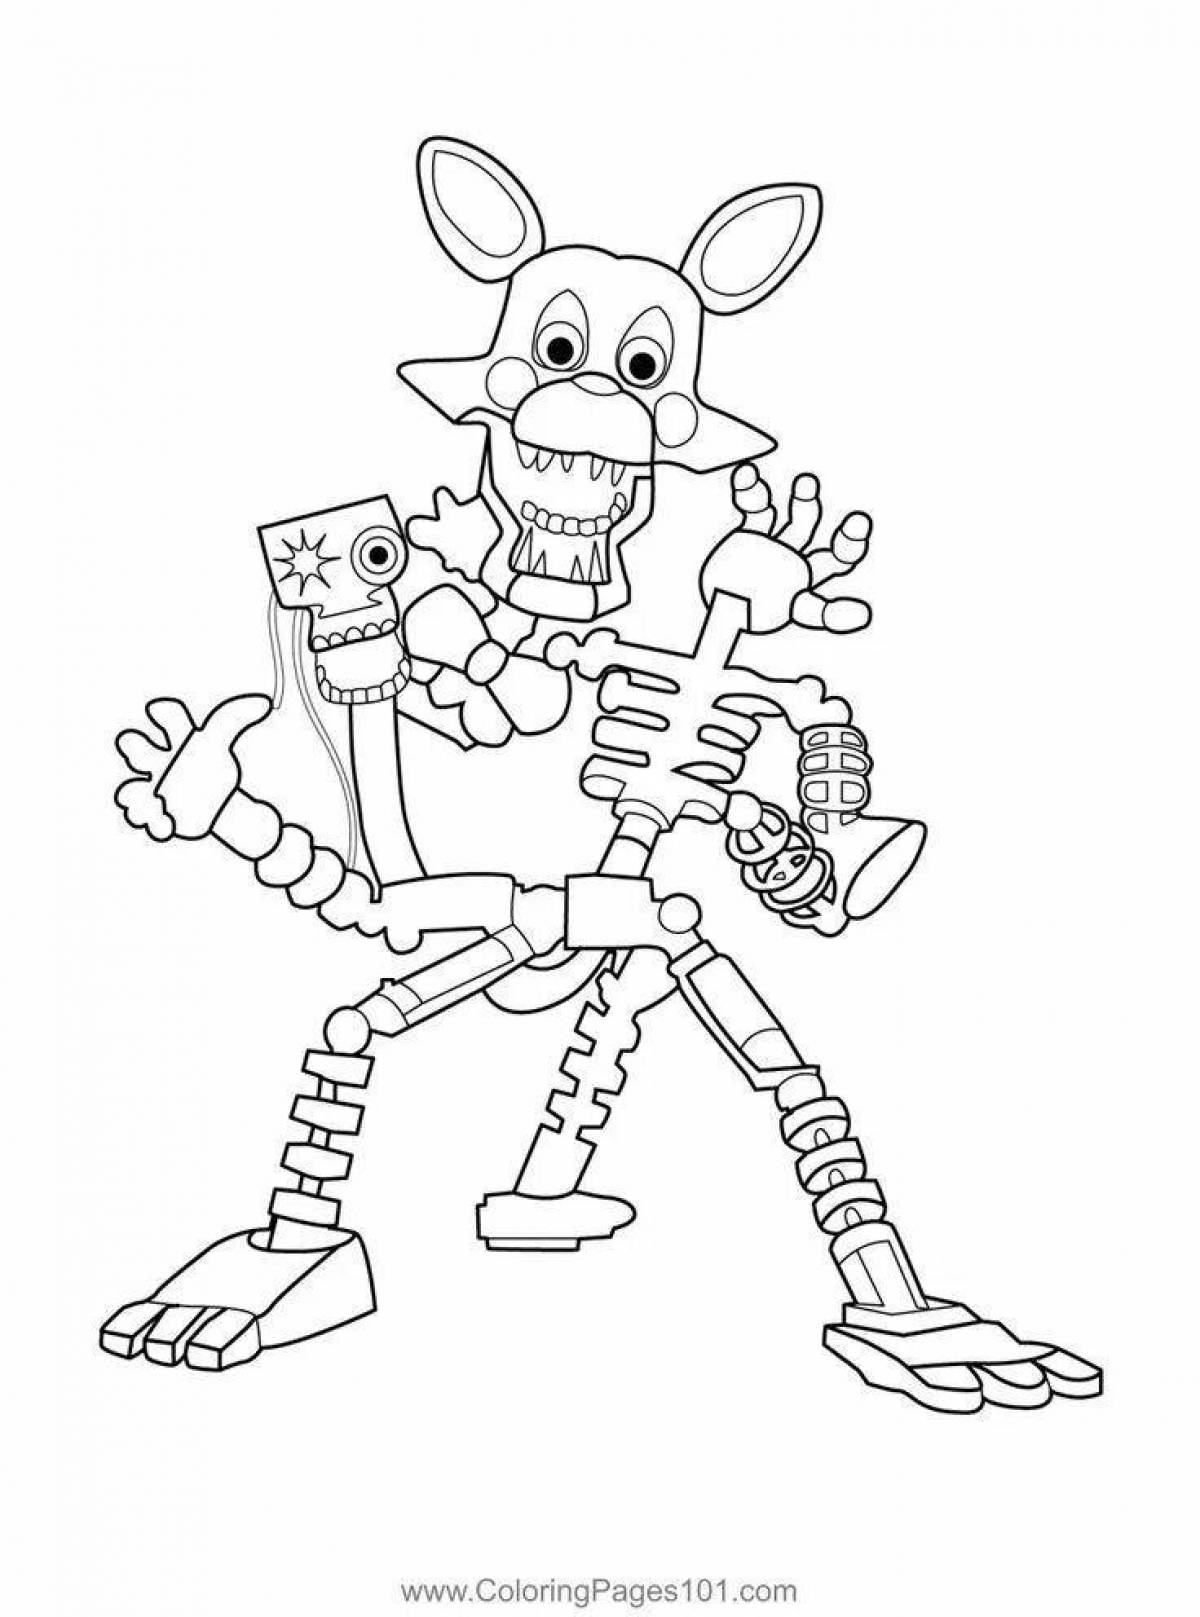 Coloring the magical world of fnaf